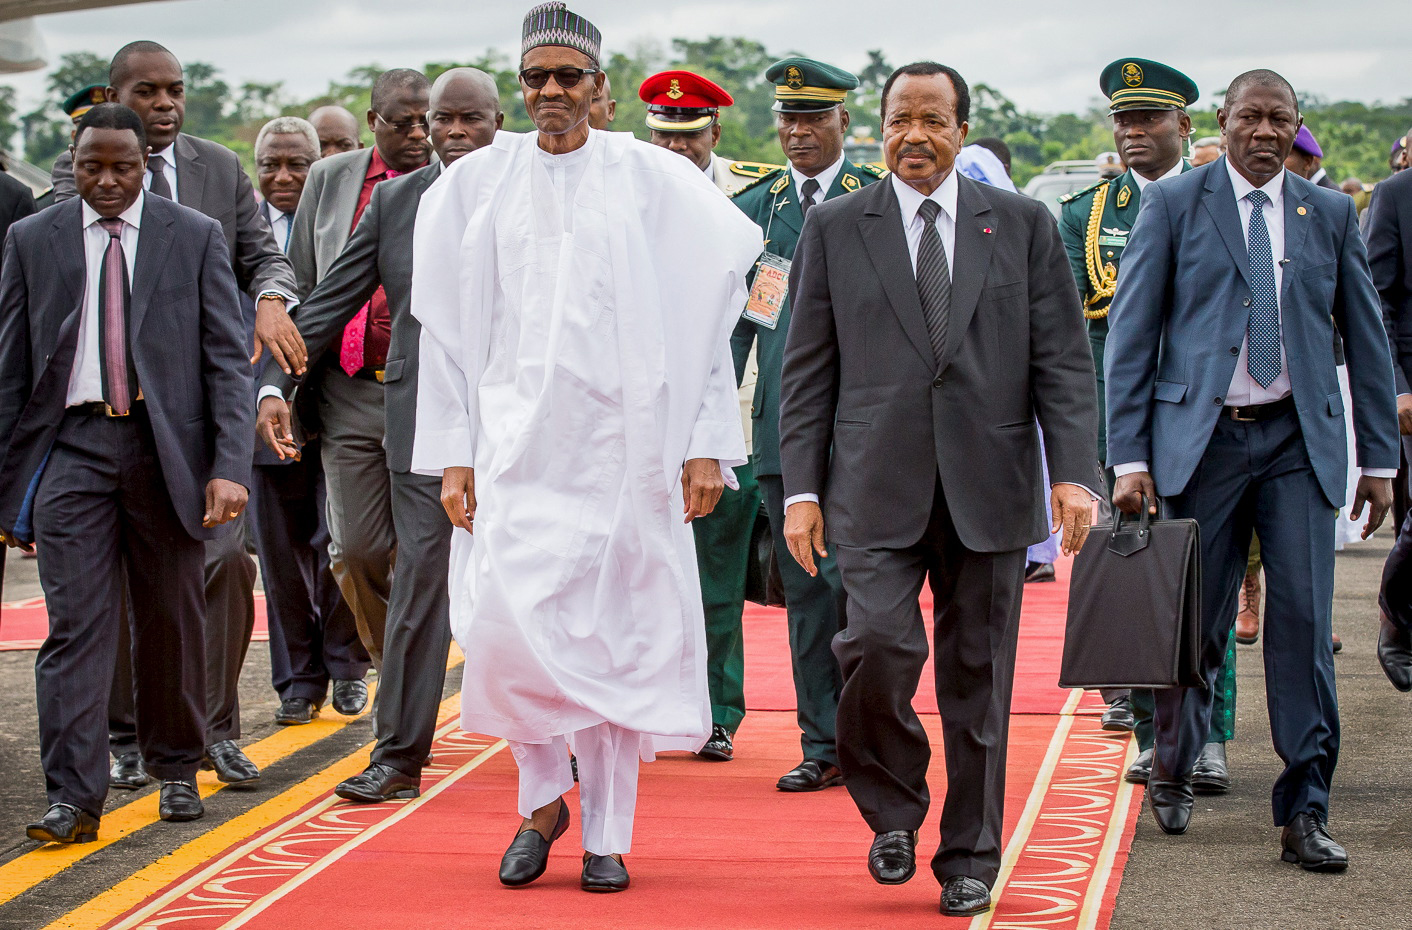 Nigeria's President Muhammadu Buhari, left, walks on a red carpet with Cameroon's President Paul Biya, right, as he arrives on an official visit to Cameroon in Yaounde on July 29, 2015. (Bayo Omoboriowo—Reuters)